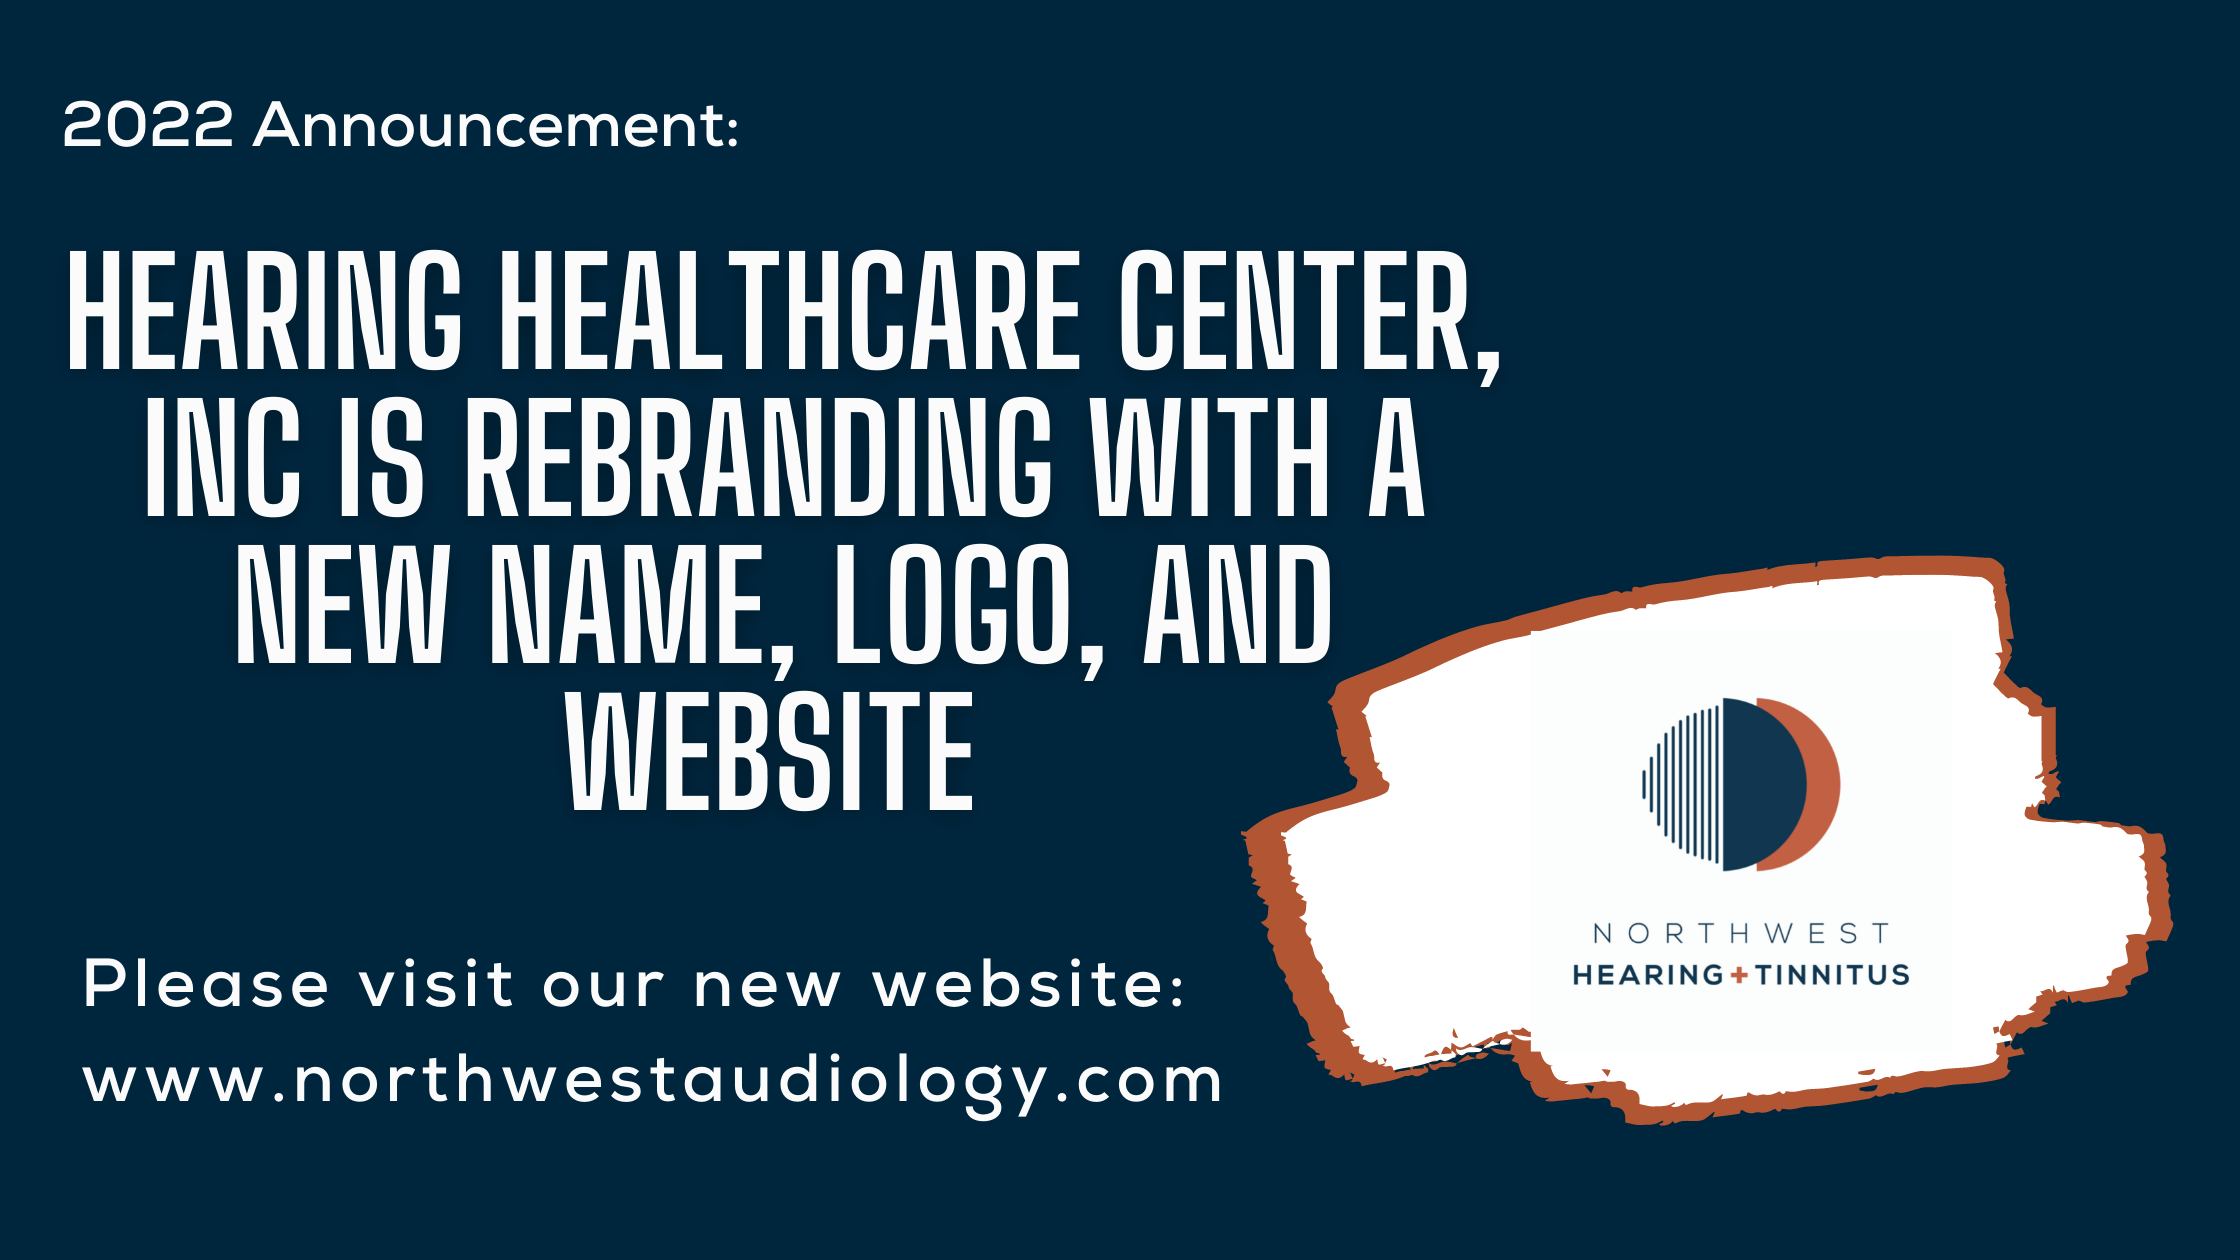 Hearing Healthcare Center, Inc. is now Northwest Hearing + Tinnitus